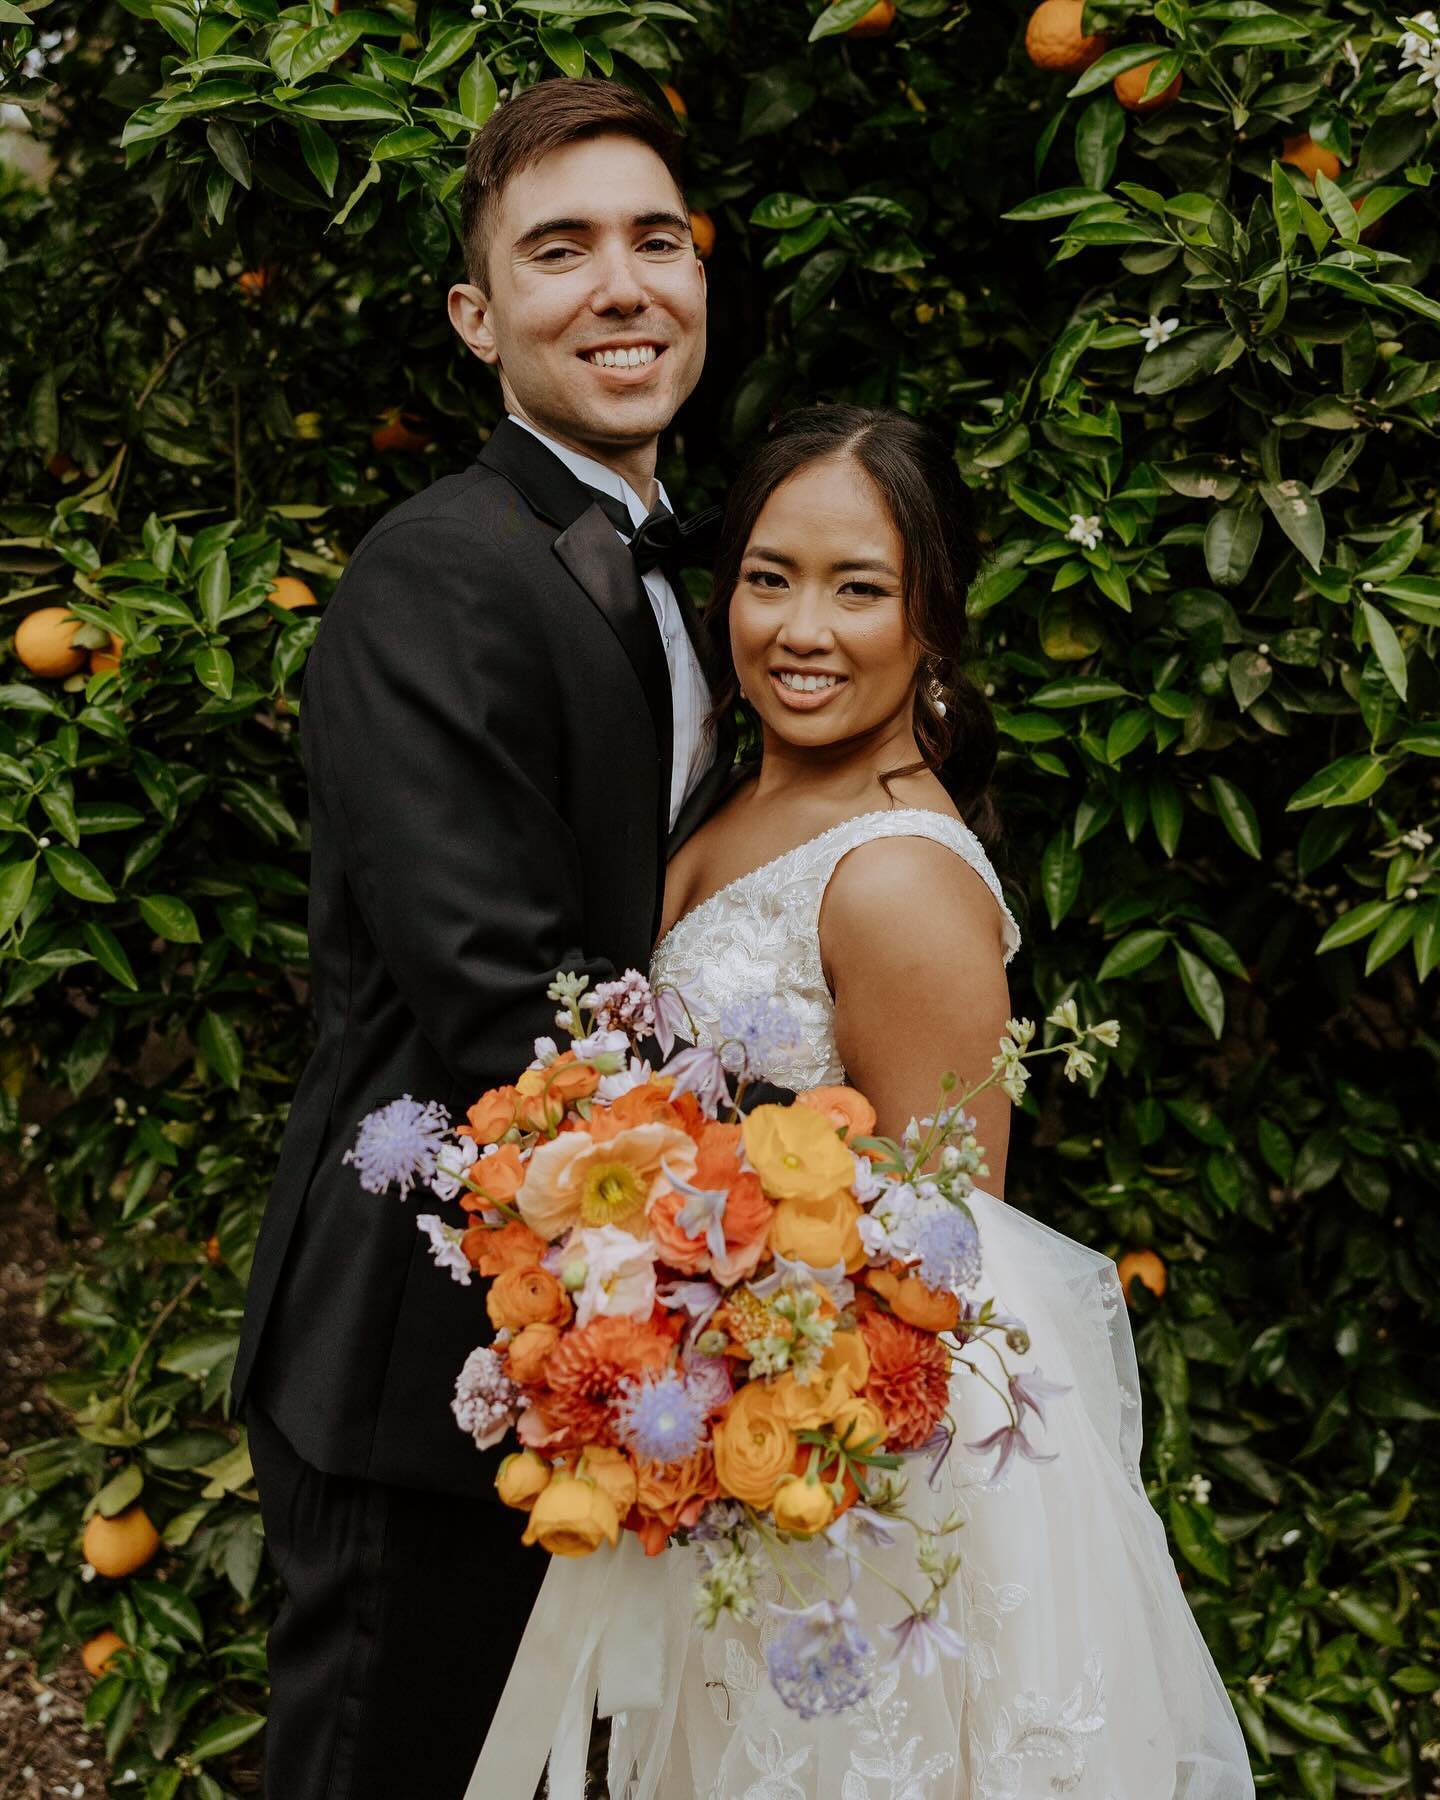 We manifested COLOR this year and here is one beautiful example. 

Photographer: @parallel33photography 
Venue: @twinoaksgardens 
Bride: @hoorayitsmarey 
Florals: @nancylobodesigns